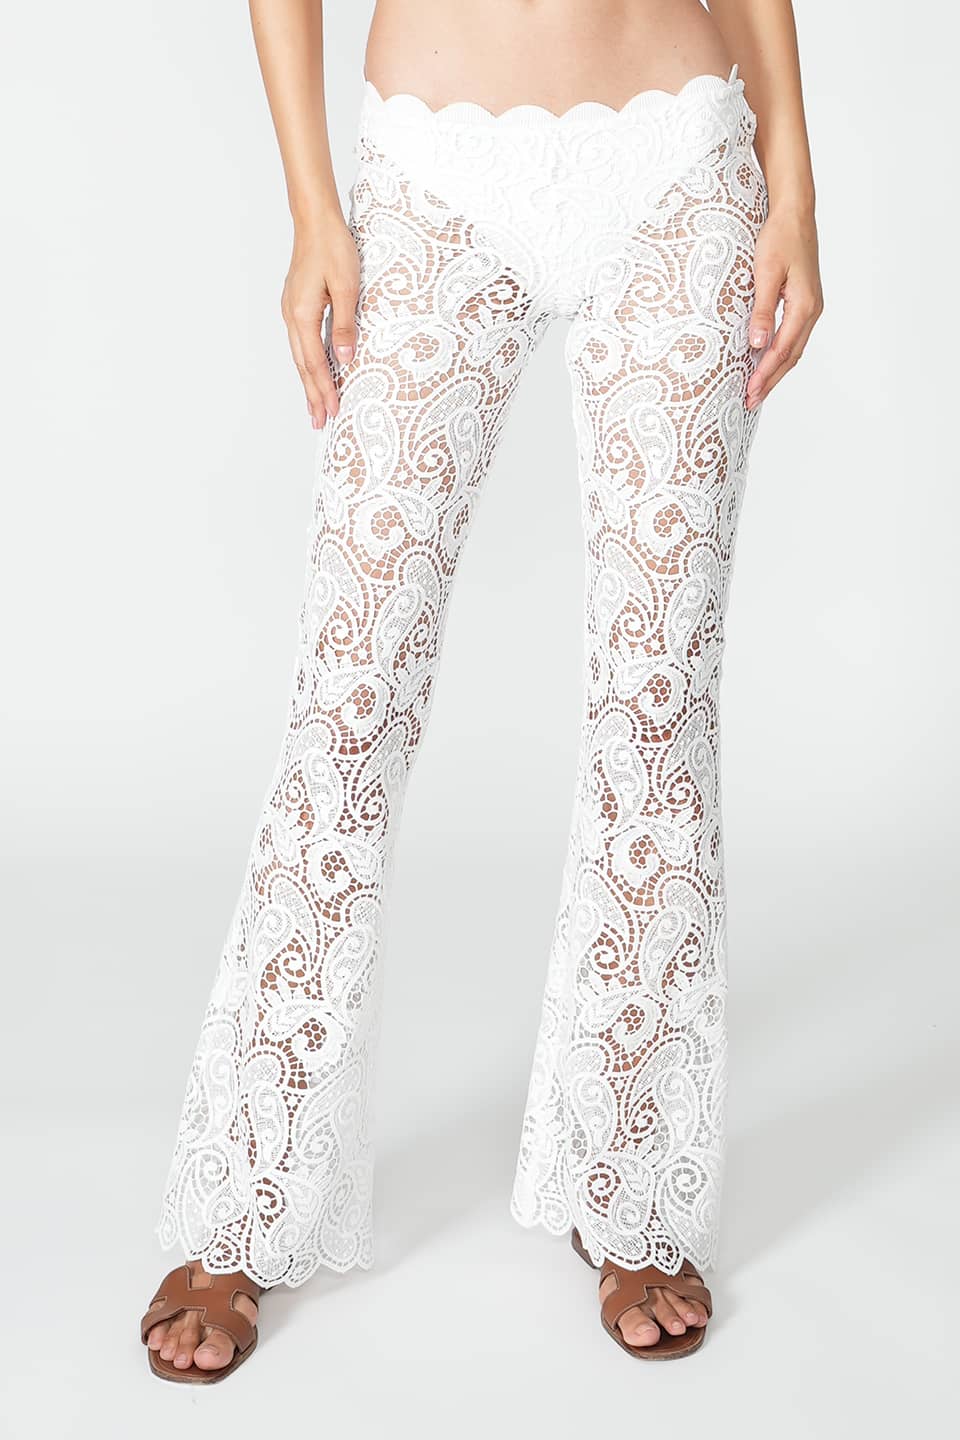 Thumbnail for Product gallery 1, Garix Pants White